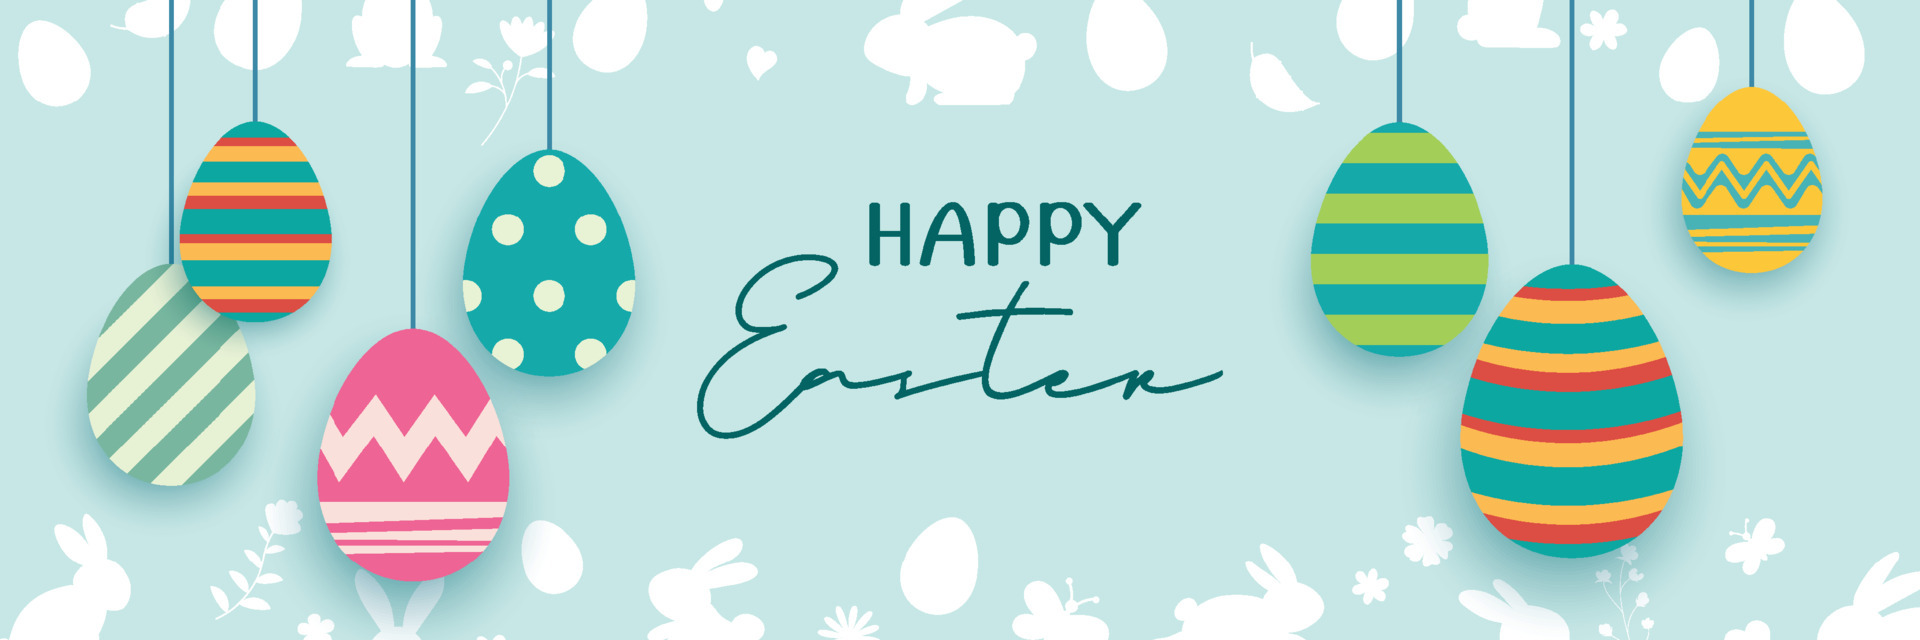 Happy easter egg greeting card background template.Can be used for ...